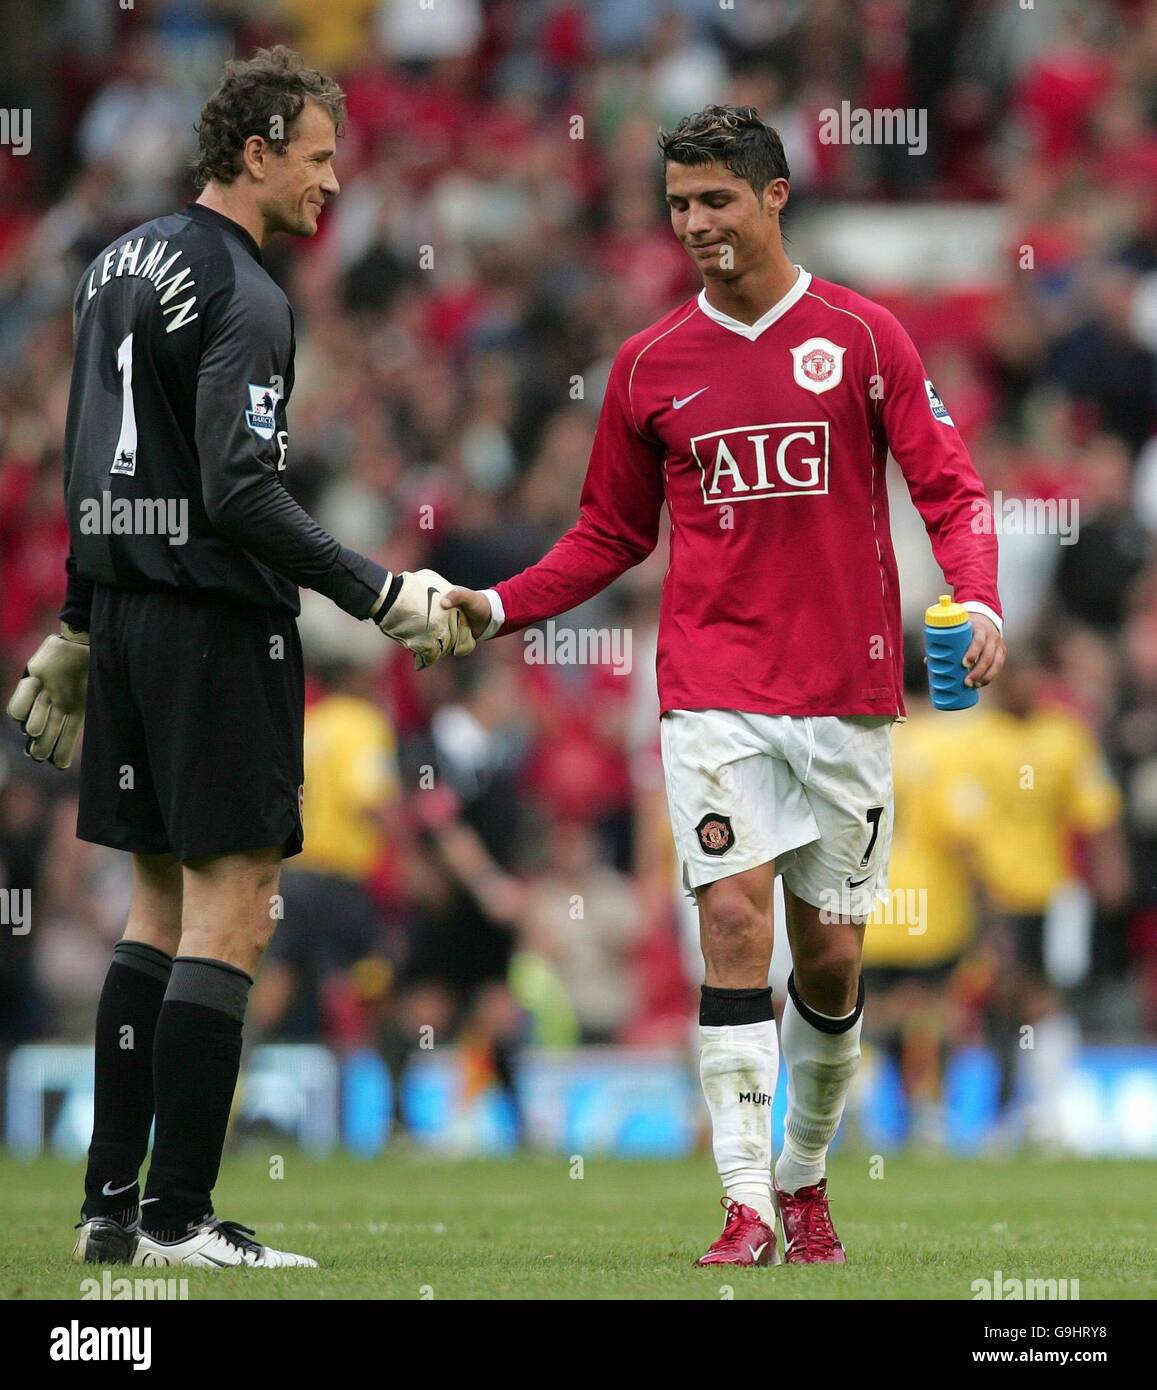 Arsenal goalkeeper Jens Lehmann shakes hands with Manchester United's Cristiano Ronaldo after the Barclays Premiership match at Old Trafford, Manchester. Stock Photo